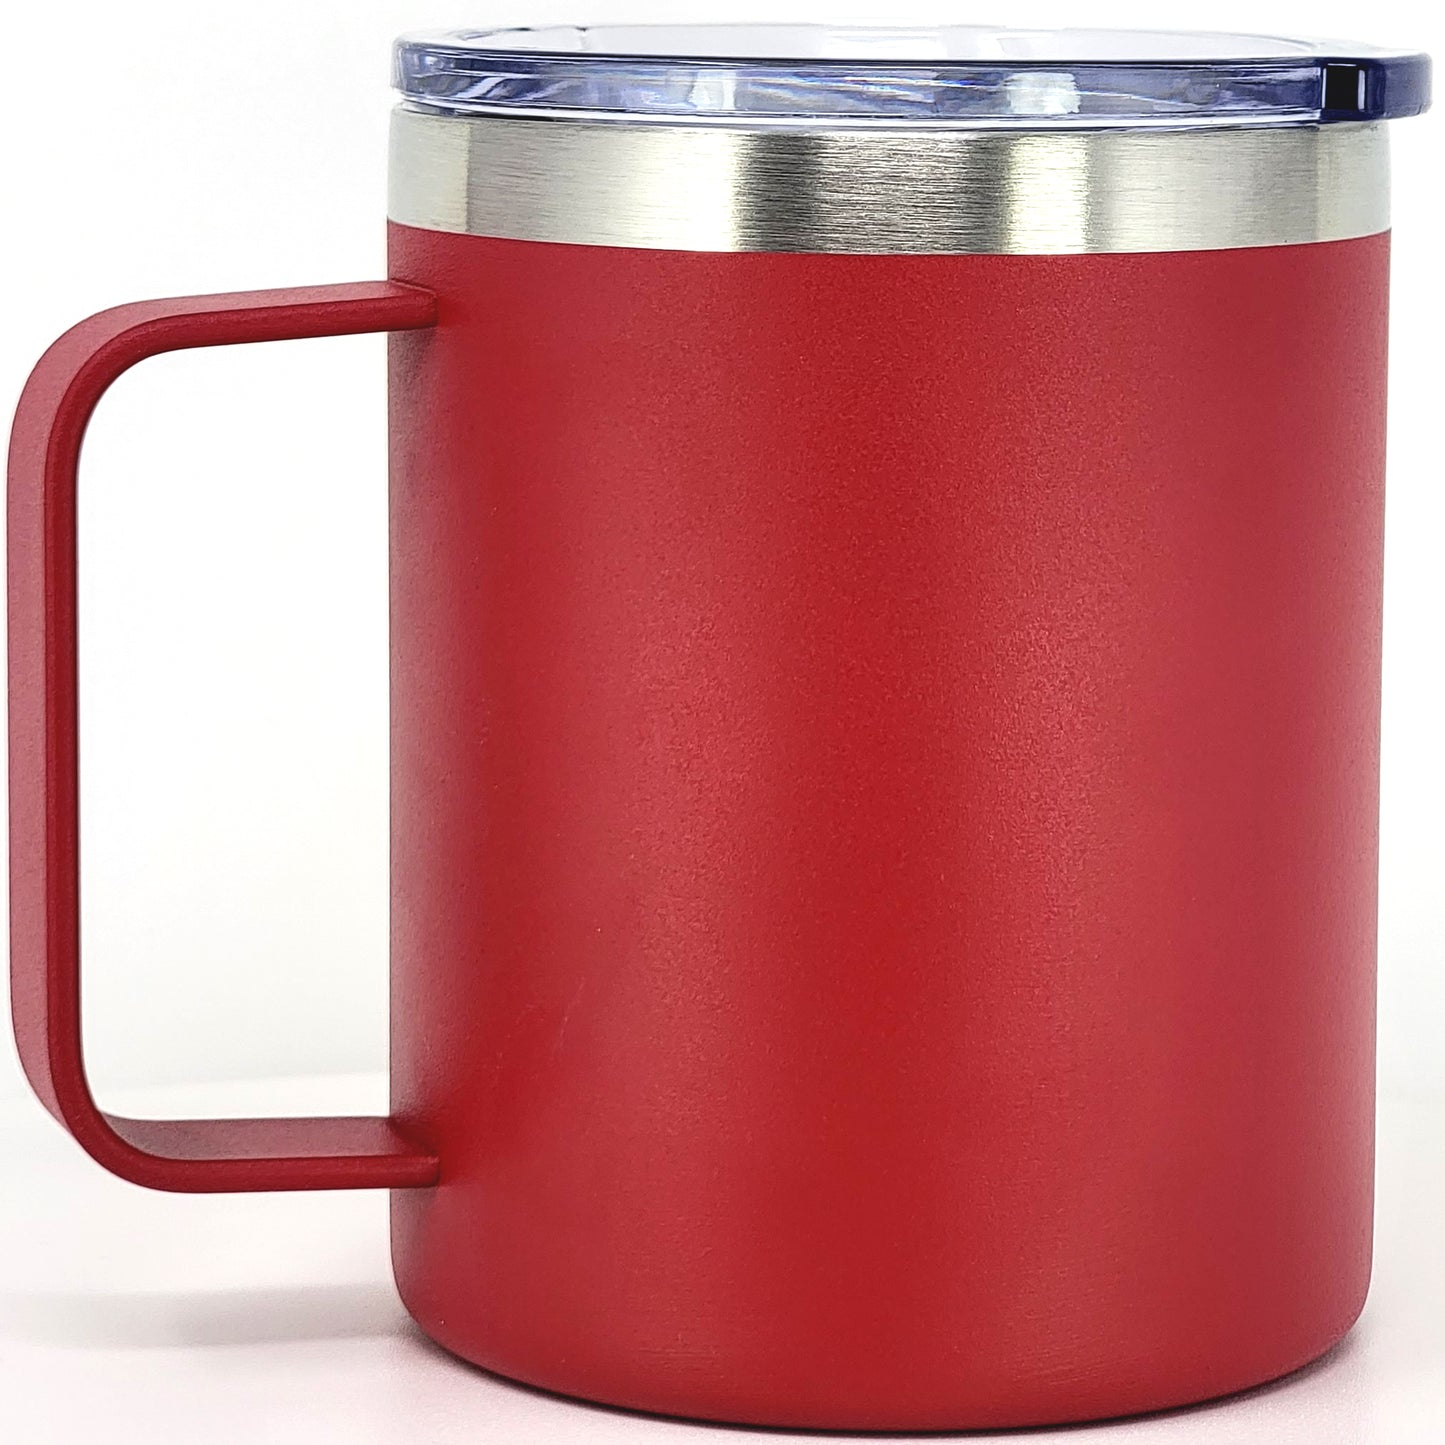 Stainless Steel 12 Oz Coffee Mug With Handle -Powder Coating 304 Stainless Steel-  and Slider Block Lid Double Wall Insulated